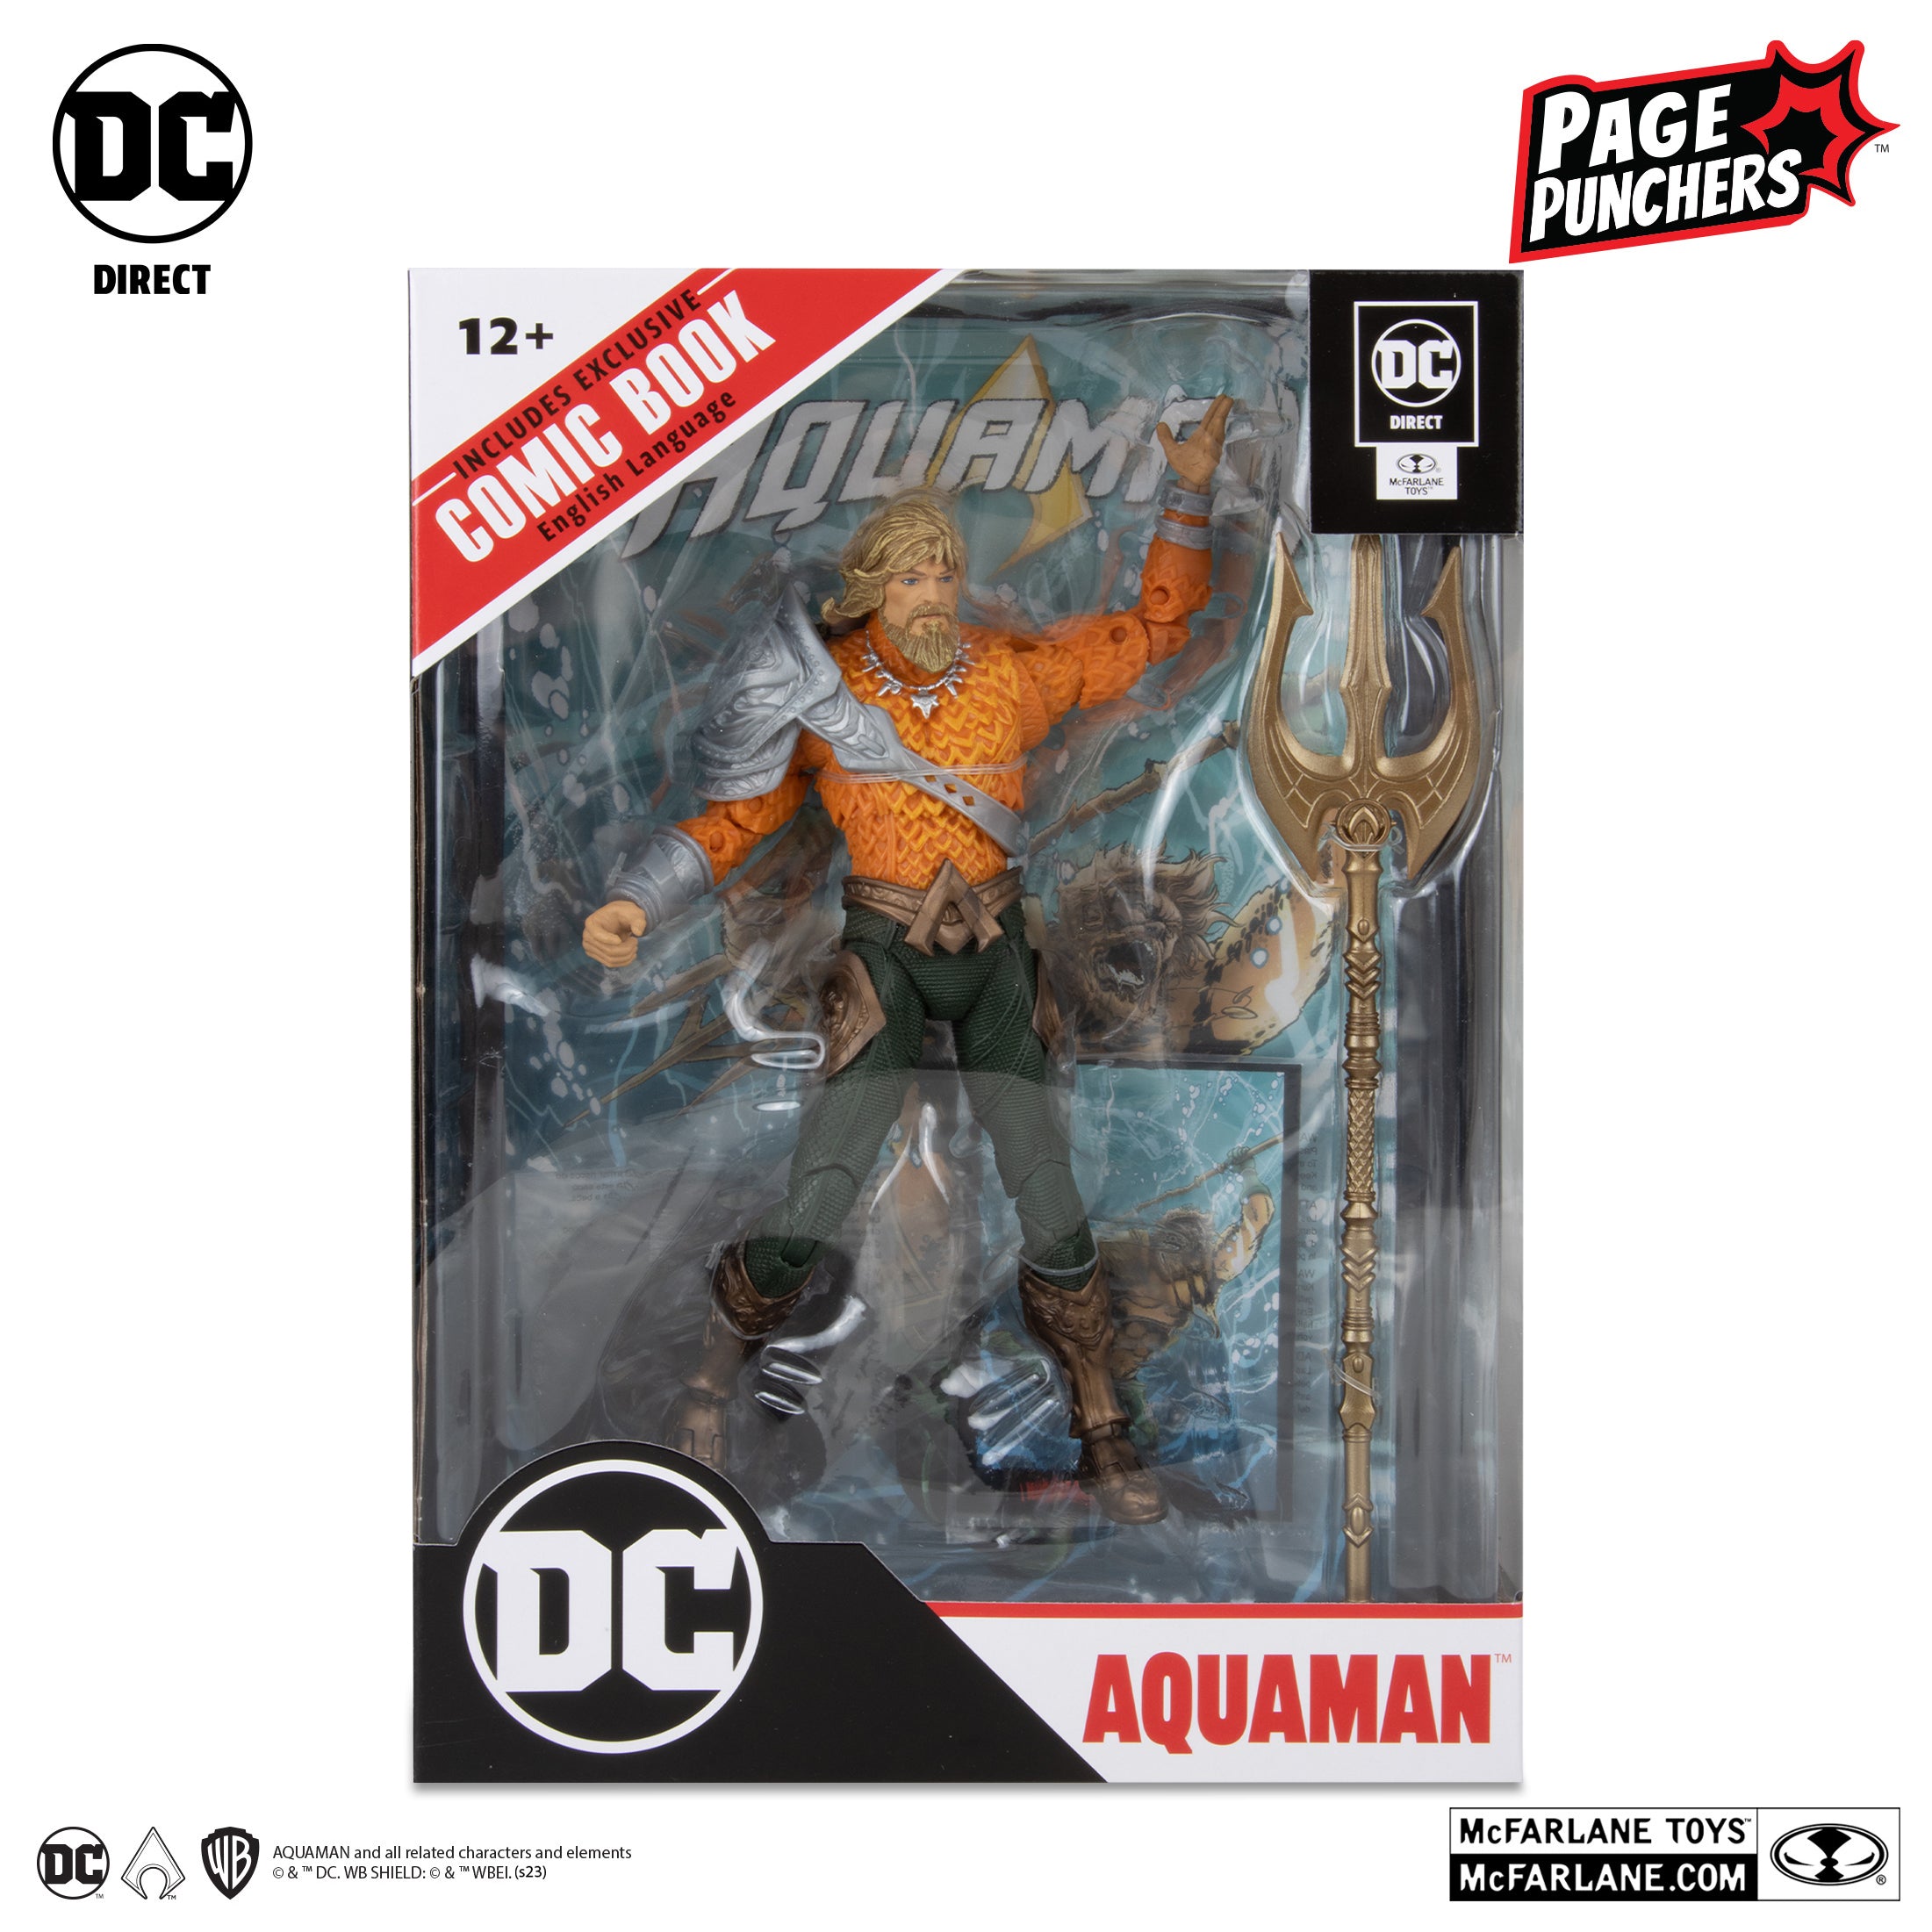 Aquaman (DC Page Punchers) Figure By McFarlane